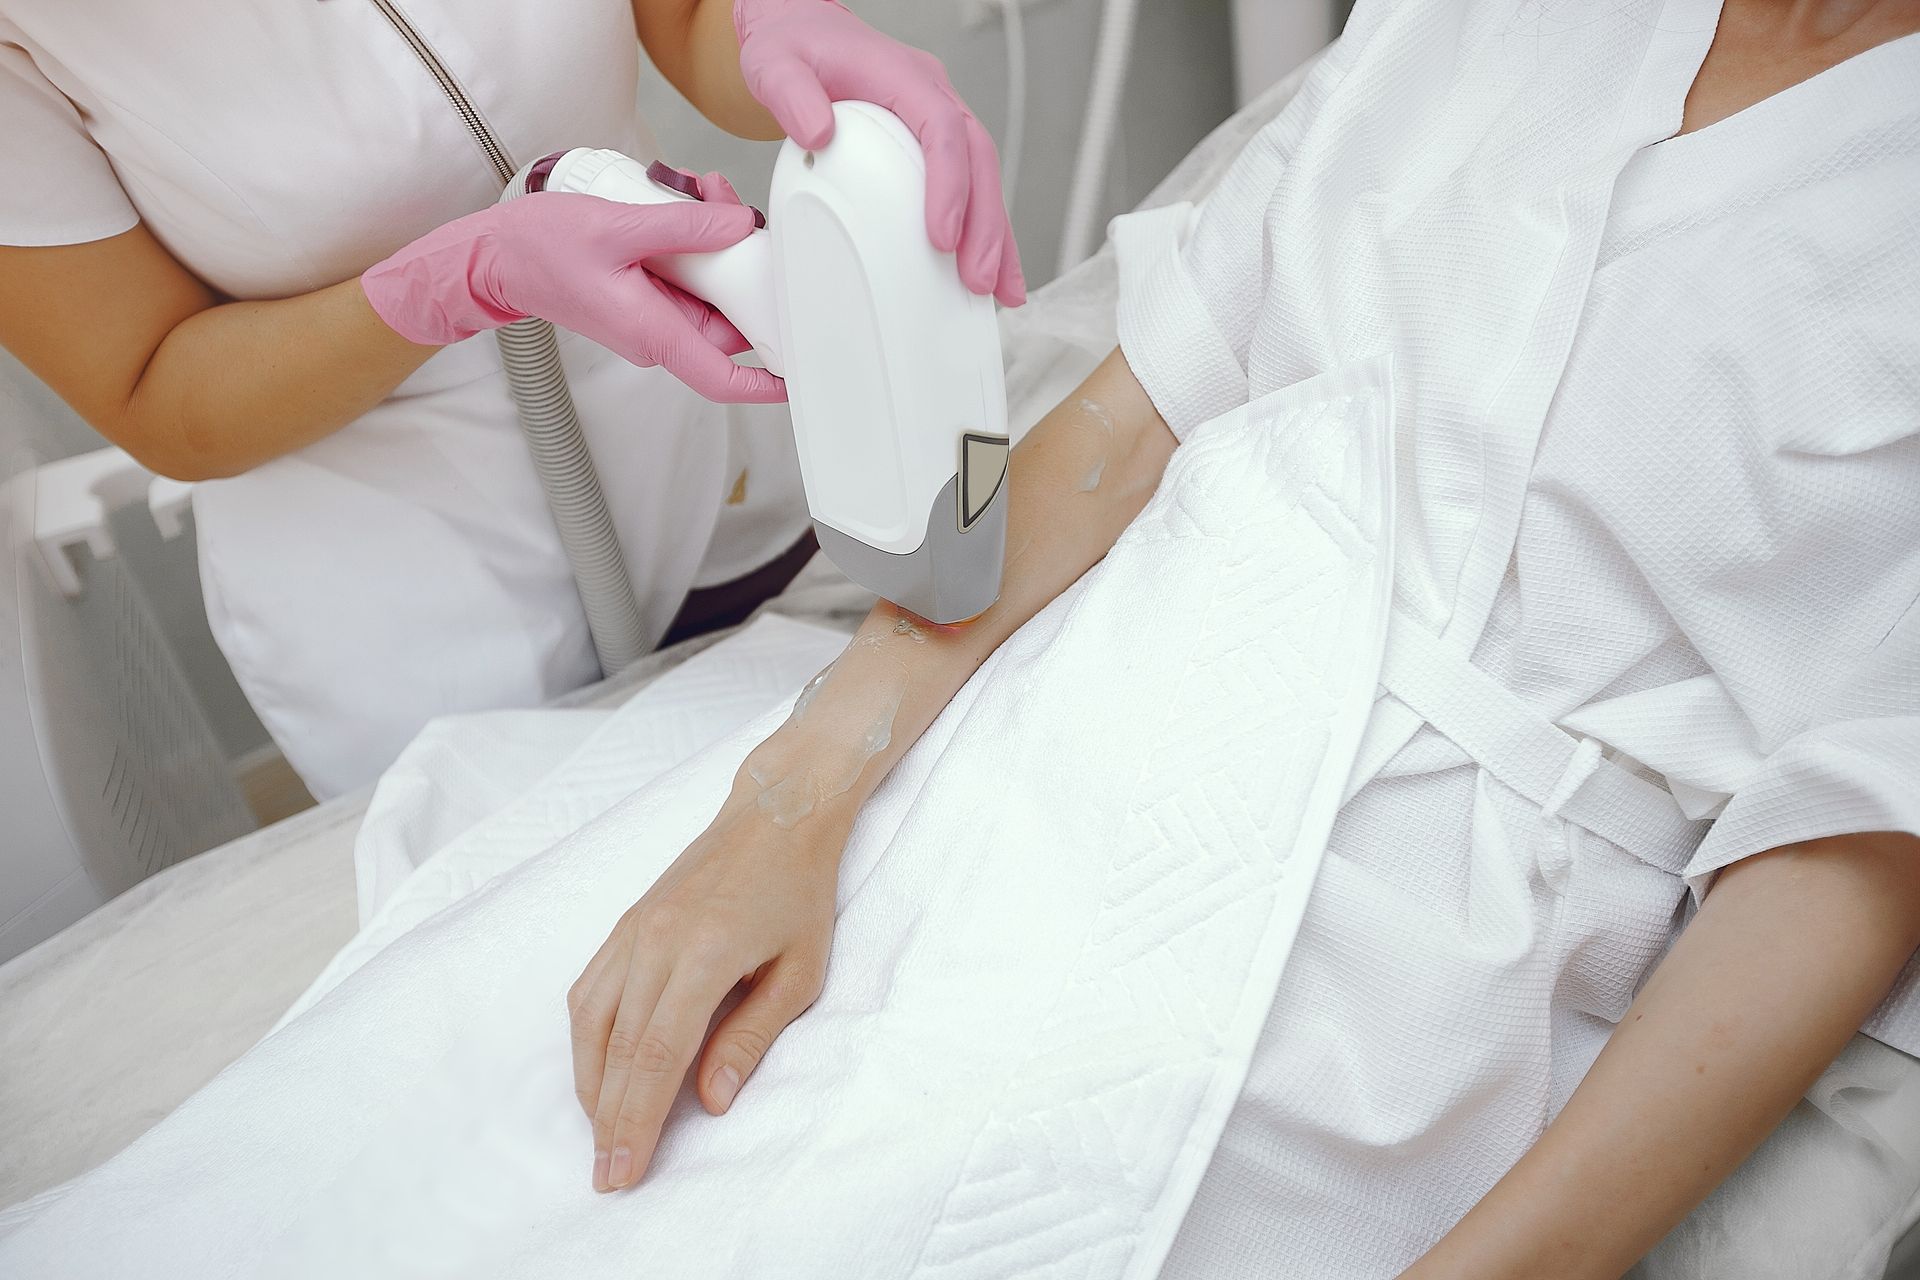 a woman is getting a hair removal treatment on her arm